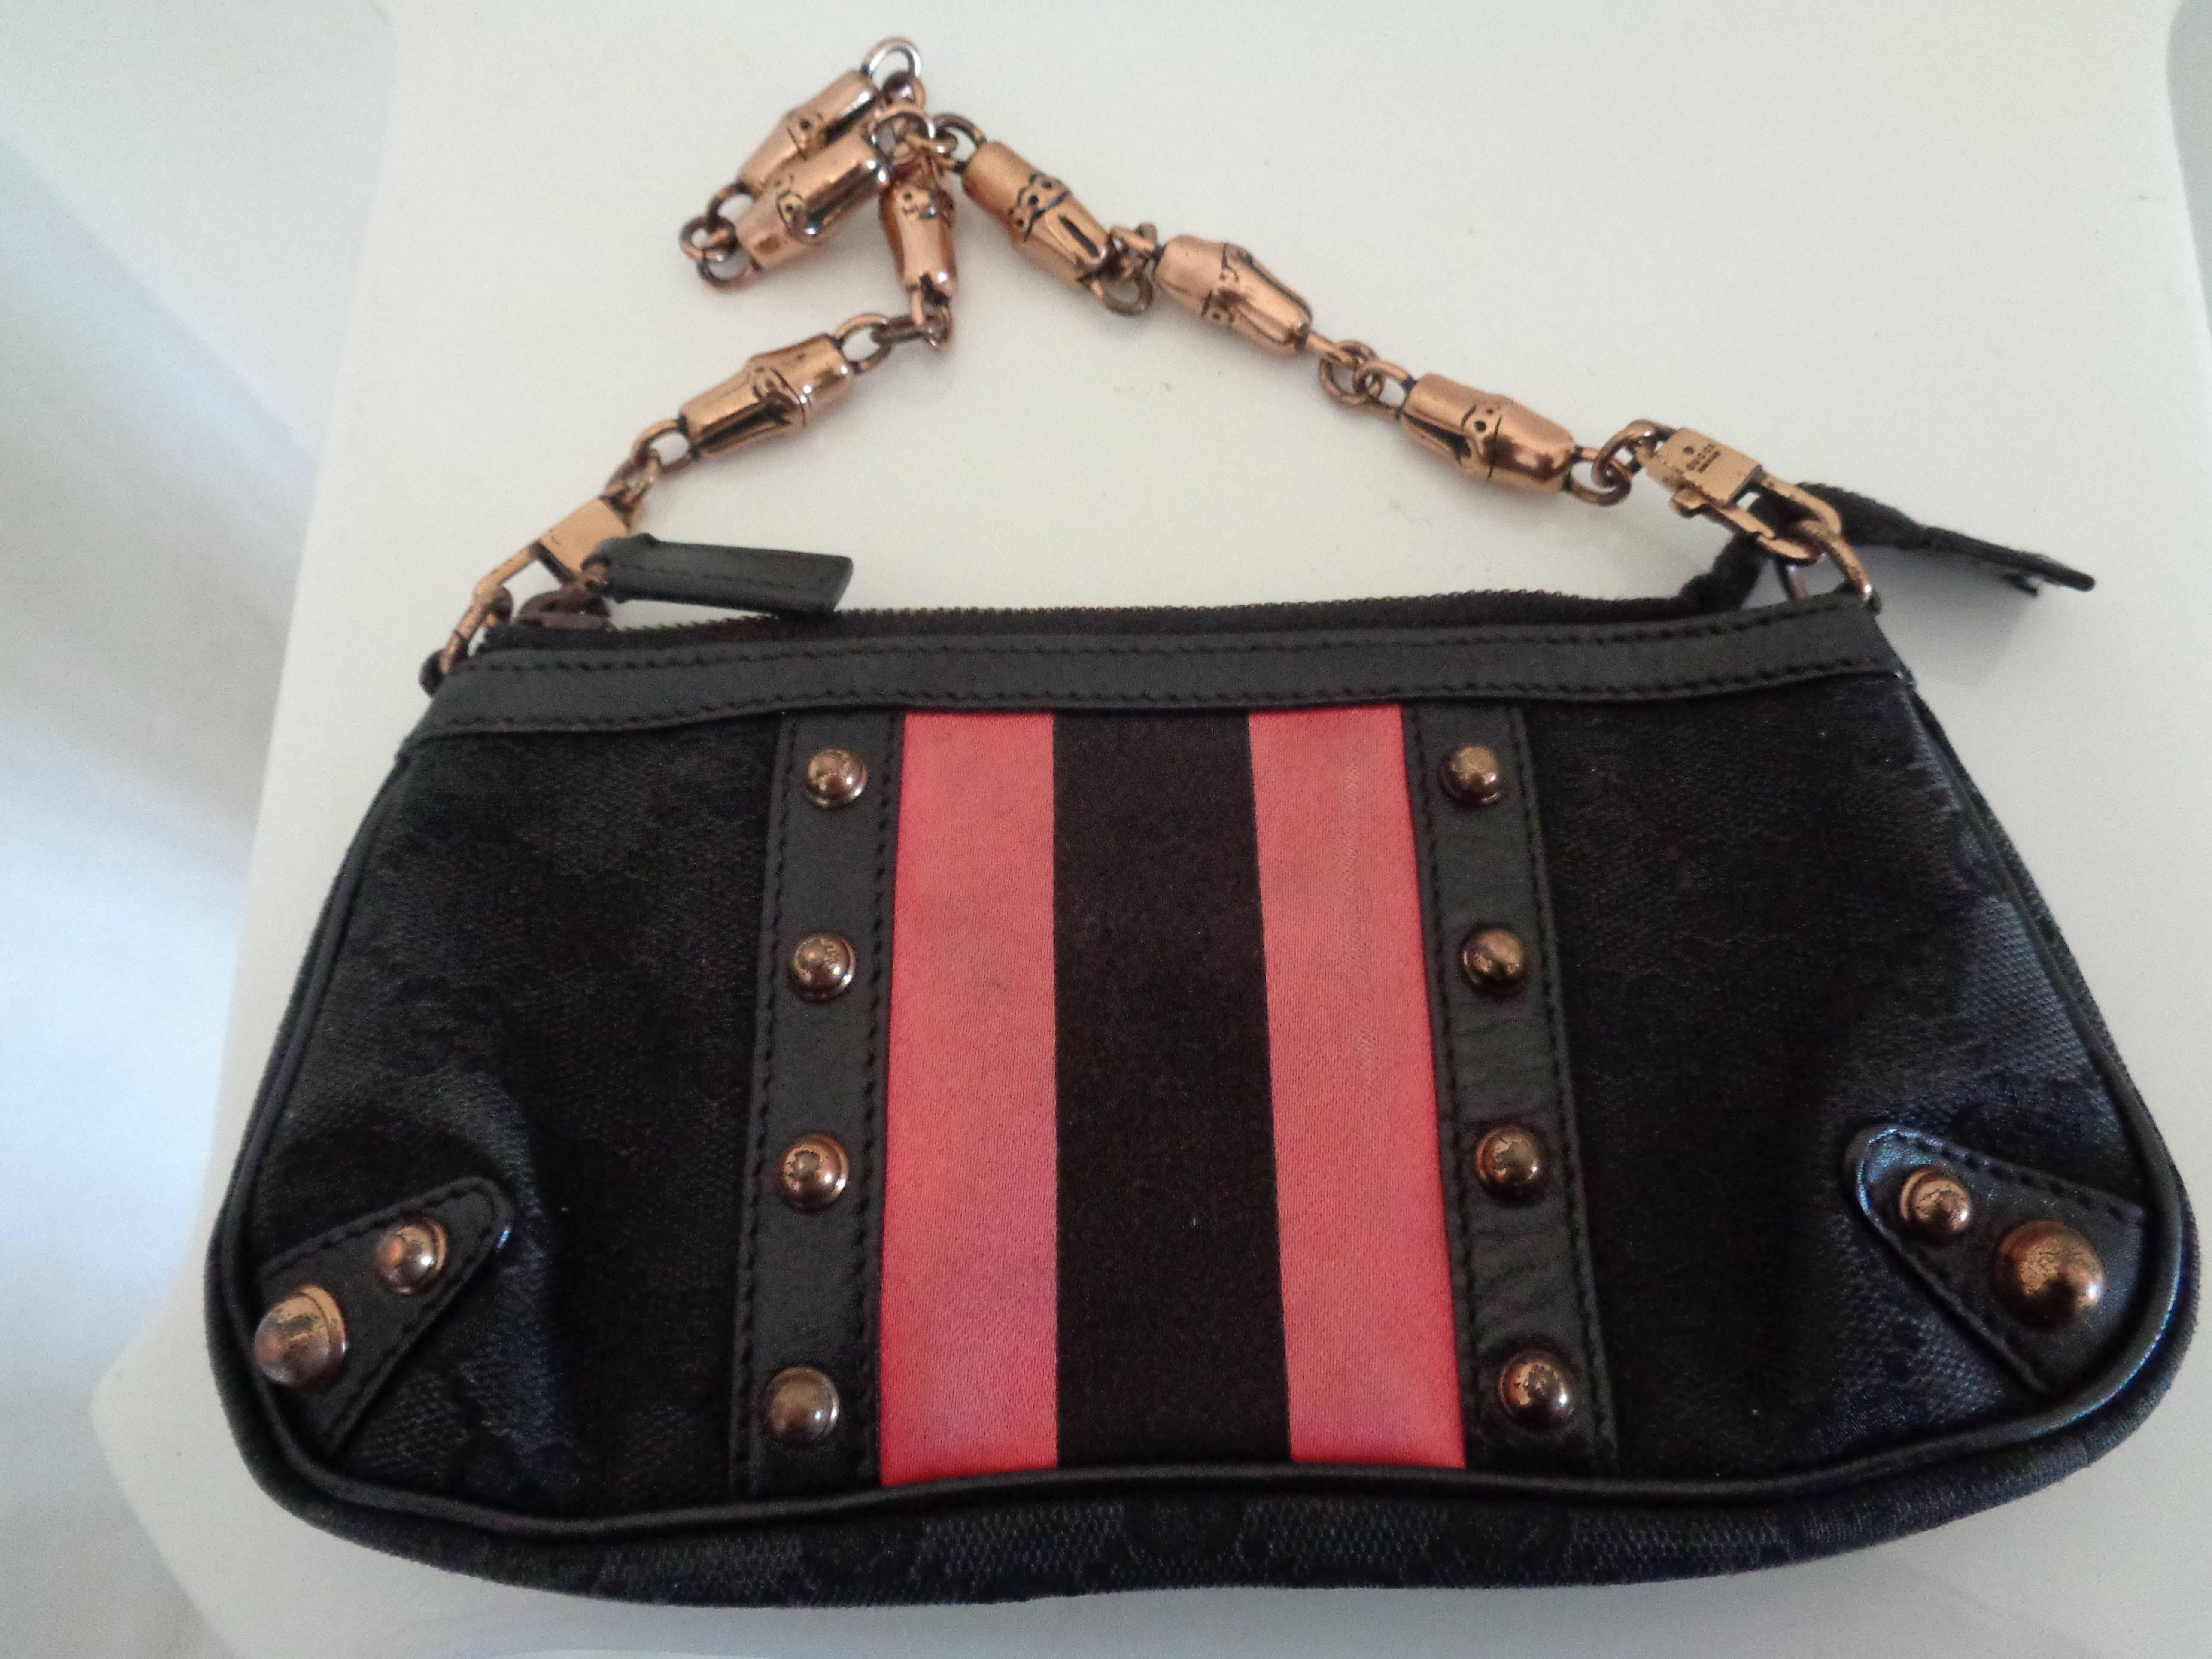 Gucci black Canvas GG fucsia bamboo chain Shoulder Bag
Black GG canvas clutch with pink satin striped accent, rose gold hardware, interior patch pocket, bamboo motif chain 